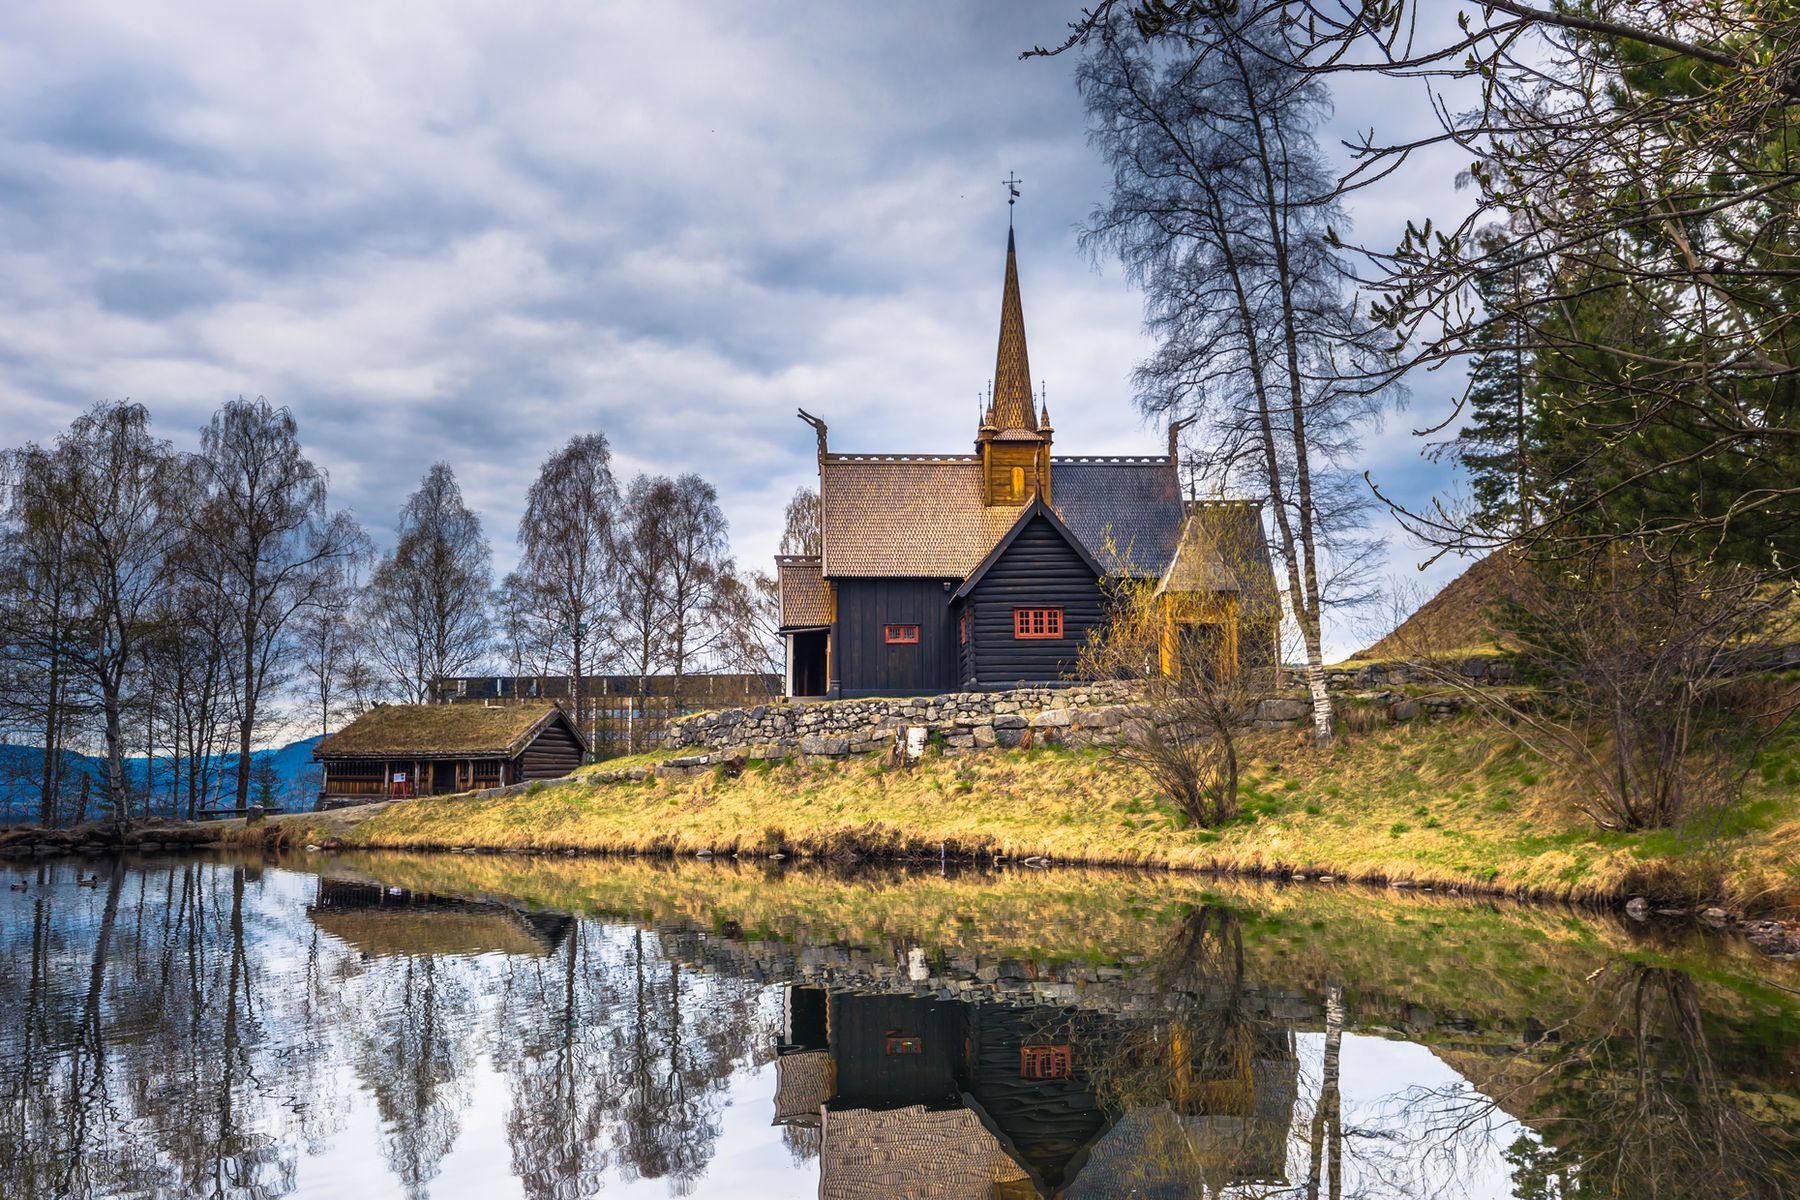 <a href="https://www.visitnorway.com/places-to-go/eastern-norway/the-lillehammer-region/?lang=usa" rel="noreferrer noopener">Lillehammer</a> is a charming historical town full of captivating attractions. It even hosted the 1994 Winter Olympics. In addition to its picturesque downtown and the open-air <a href="https://www.visitnorway.com/listings/maihaugen-museum/5314/?lang=usa" rel="noreferrer noopener">Maihaugen</a> Museum, magnificent Lake Mjøsa is just around the corner. Those planning to travel to Norway in winter can also enjoy skating, curling, sleigh rides, and of course, downhill skiing in a truly enchanting location.